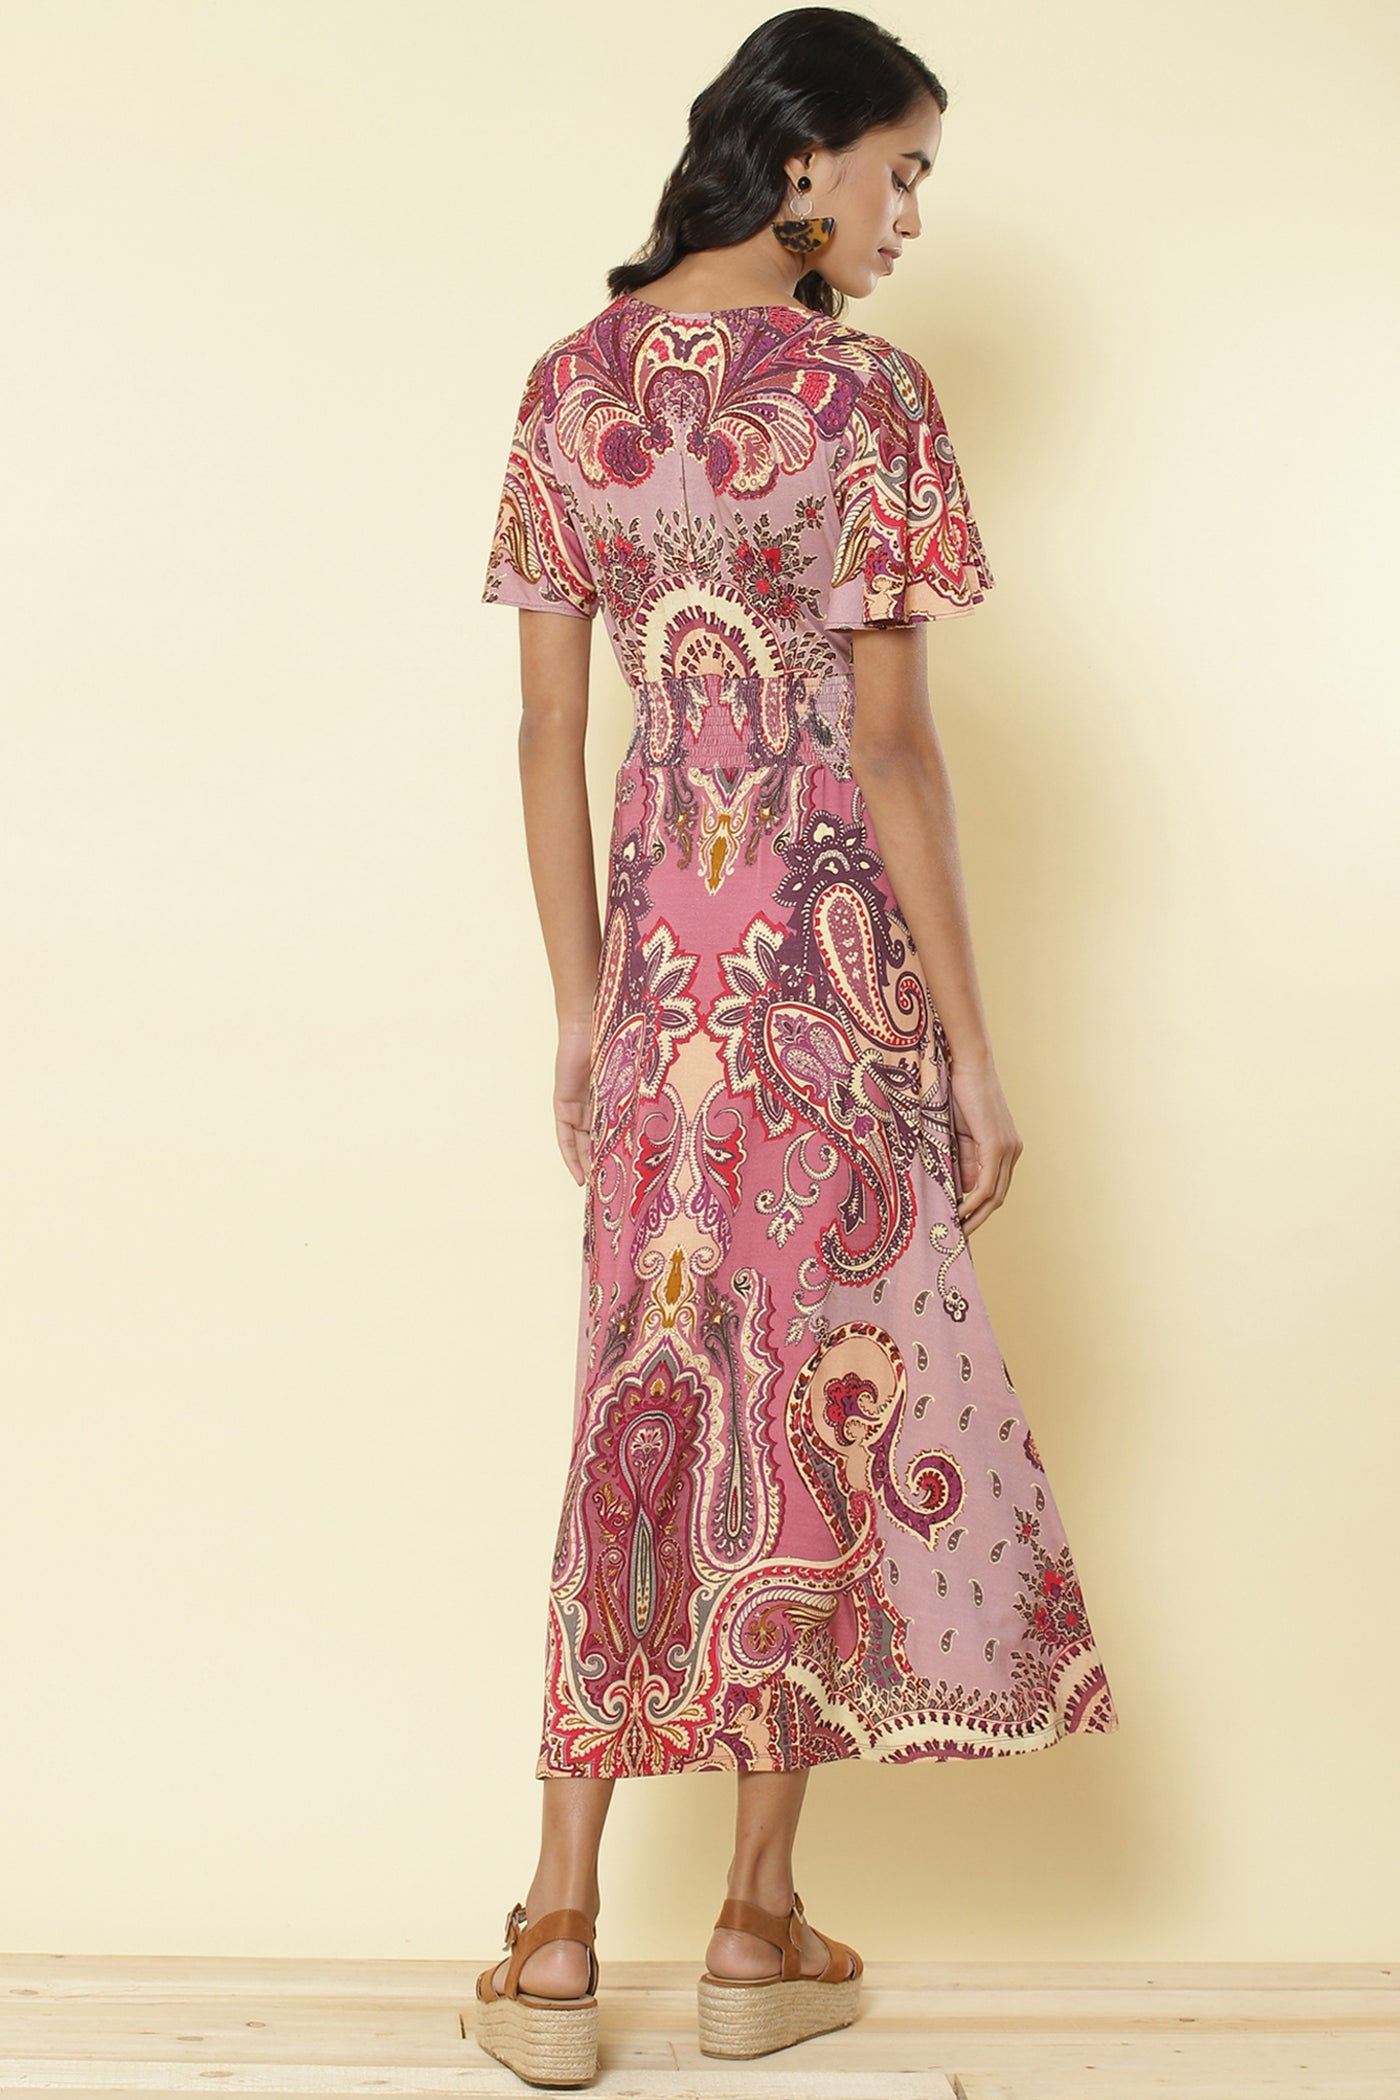 Ritu Kumar - Pink Printed long Dress - Exclusive Indian Designer Wear Latest Collections Available at Melange Singapore.